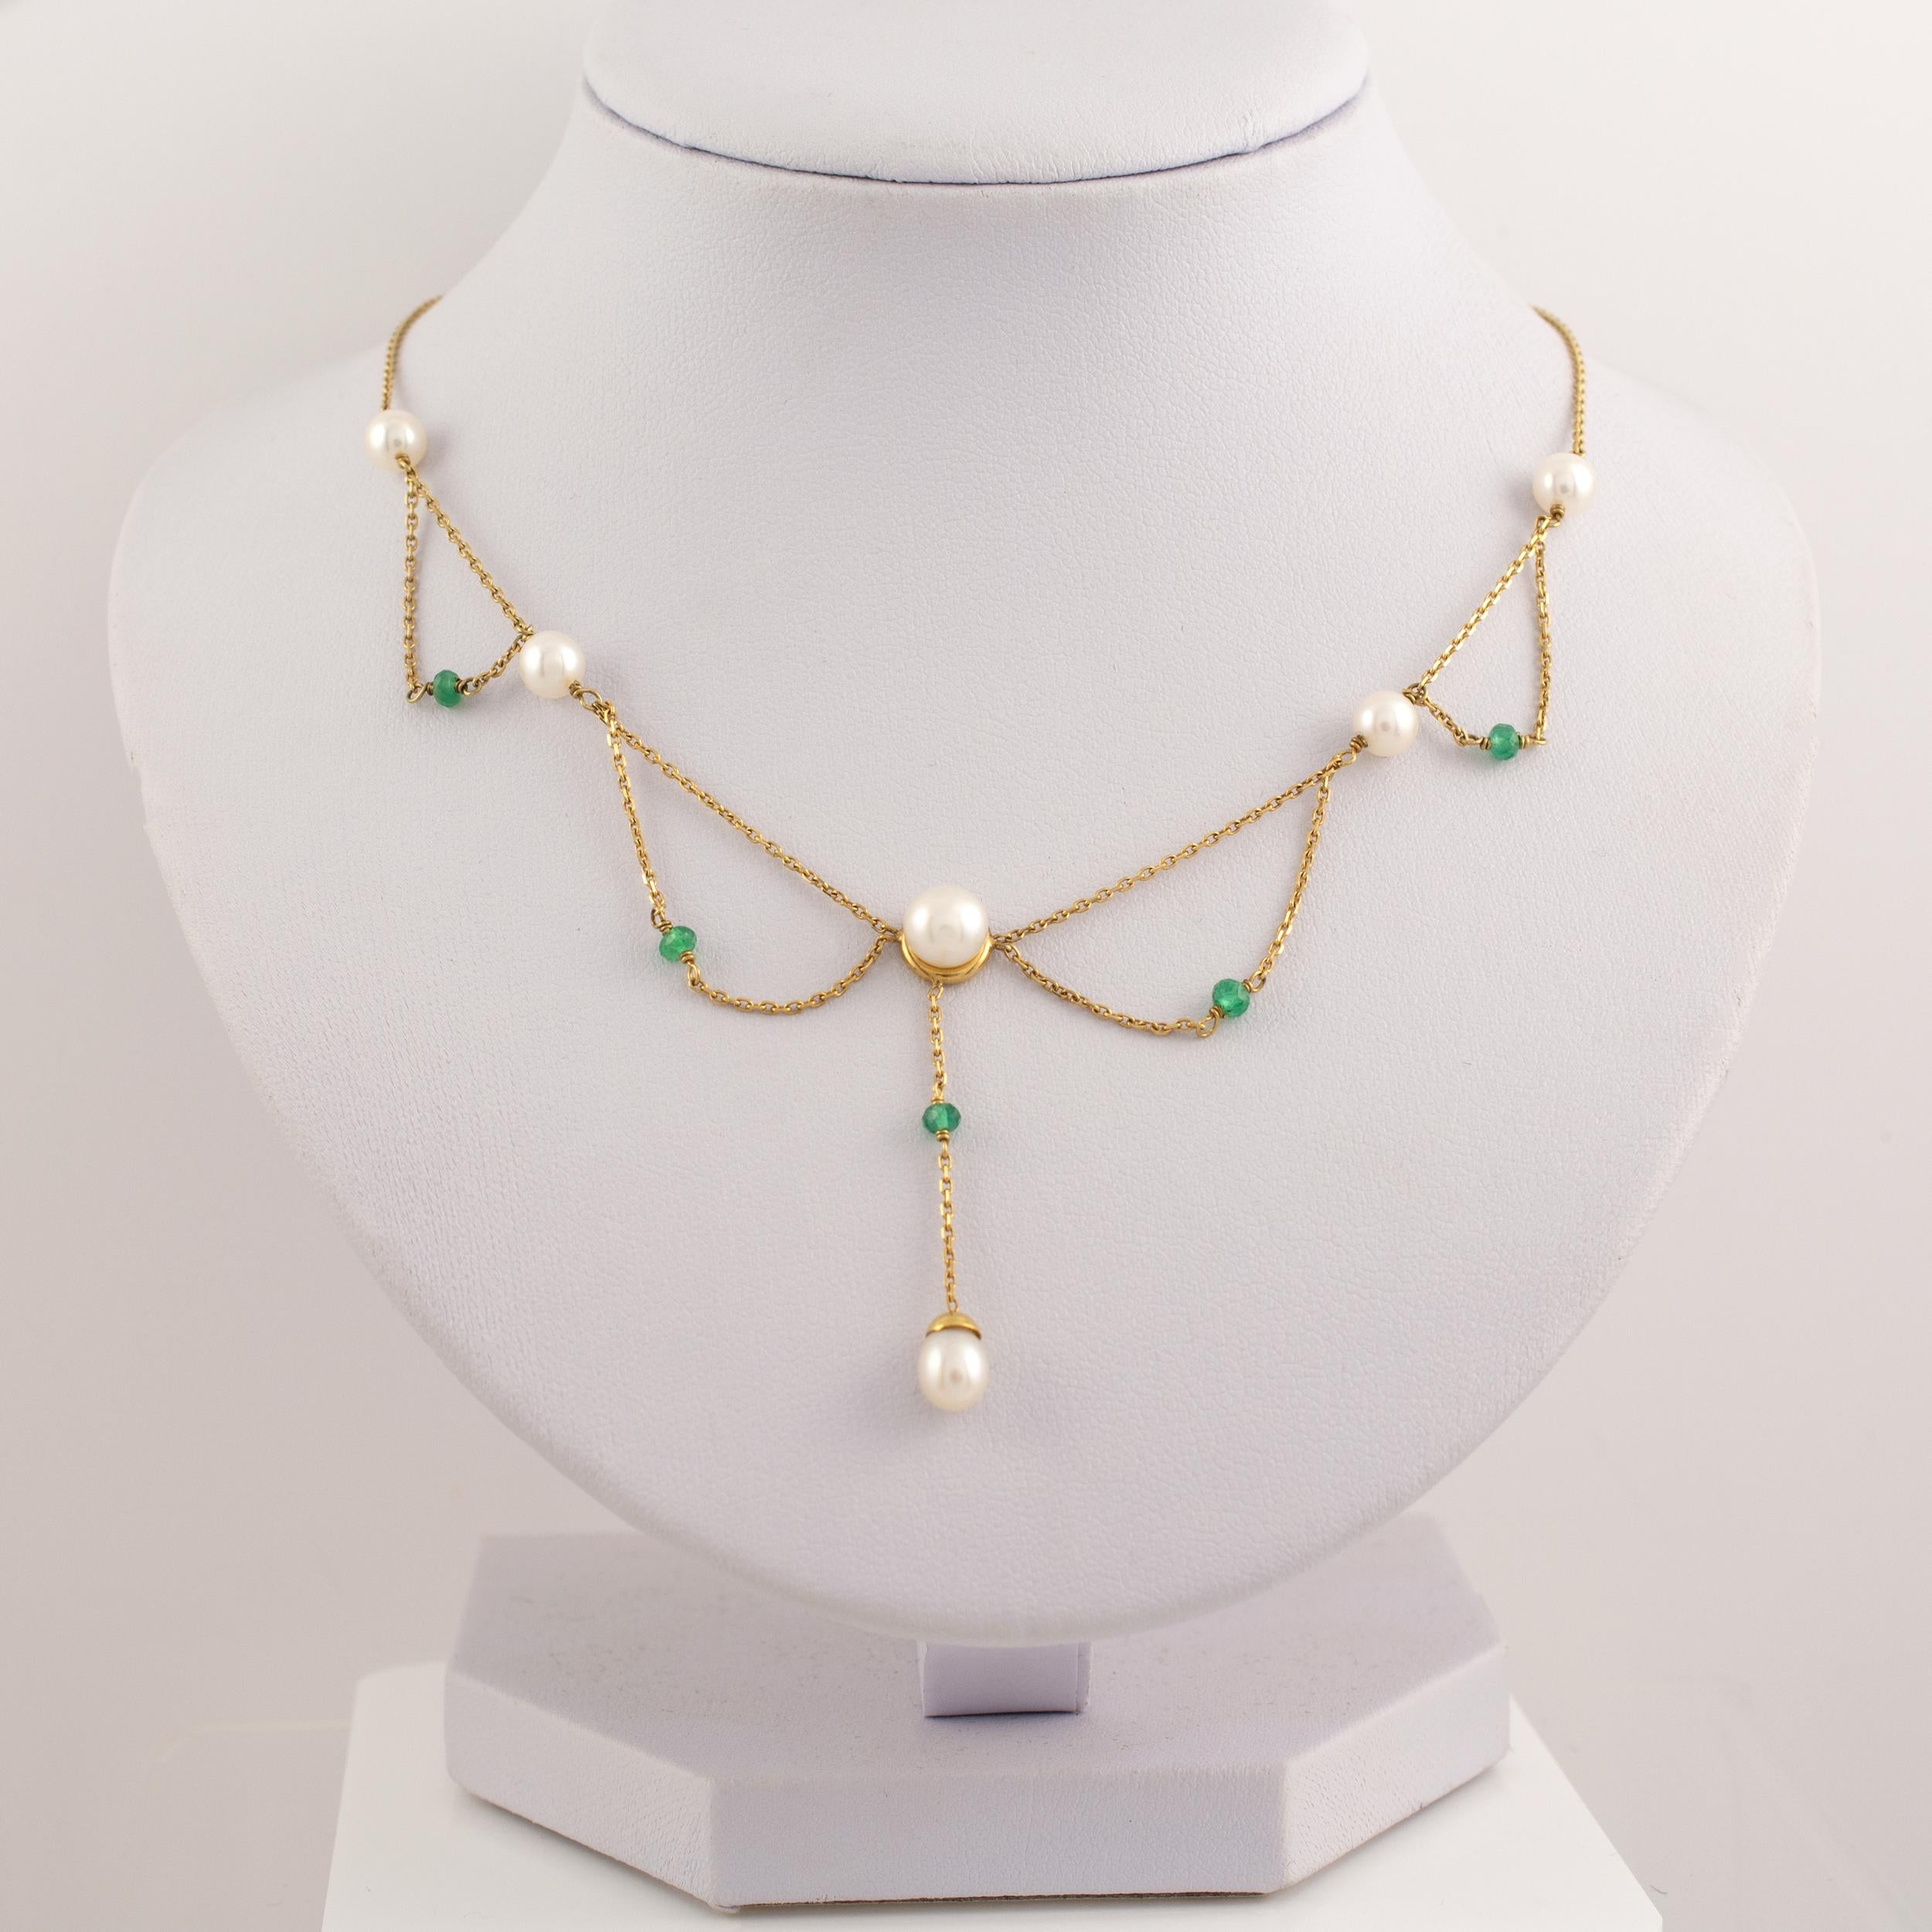 This delicate Y necklace displays cultured pearls festooned with separate small gold links set with small emerald beads. The necklace is light in weight, hangs gracefully and looks beautiful.

•  Dimensions: 15 inches in length (not including the